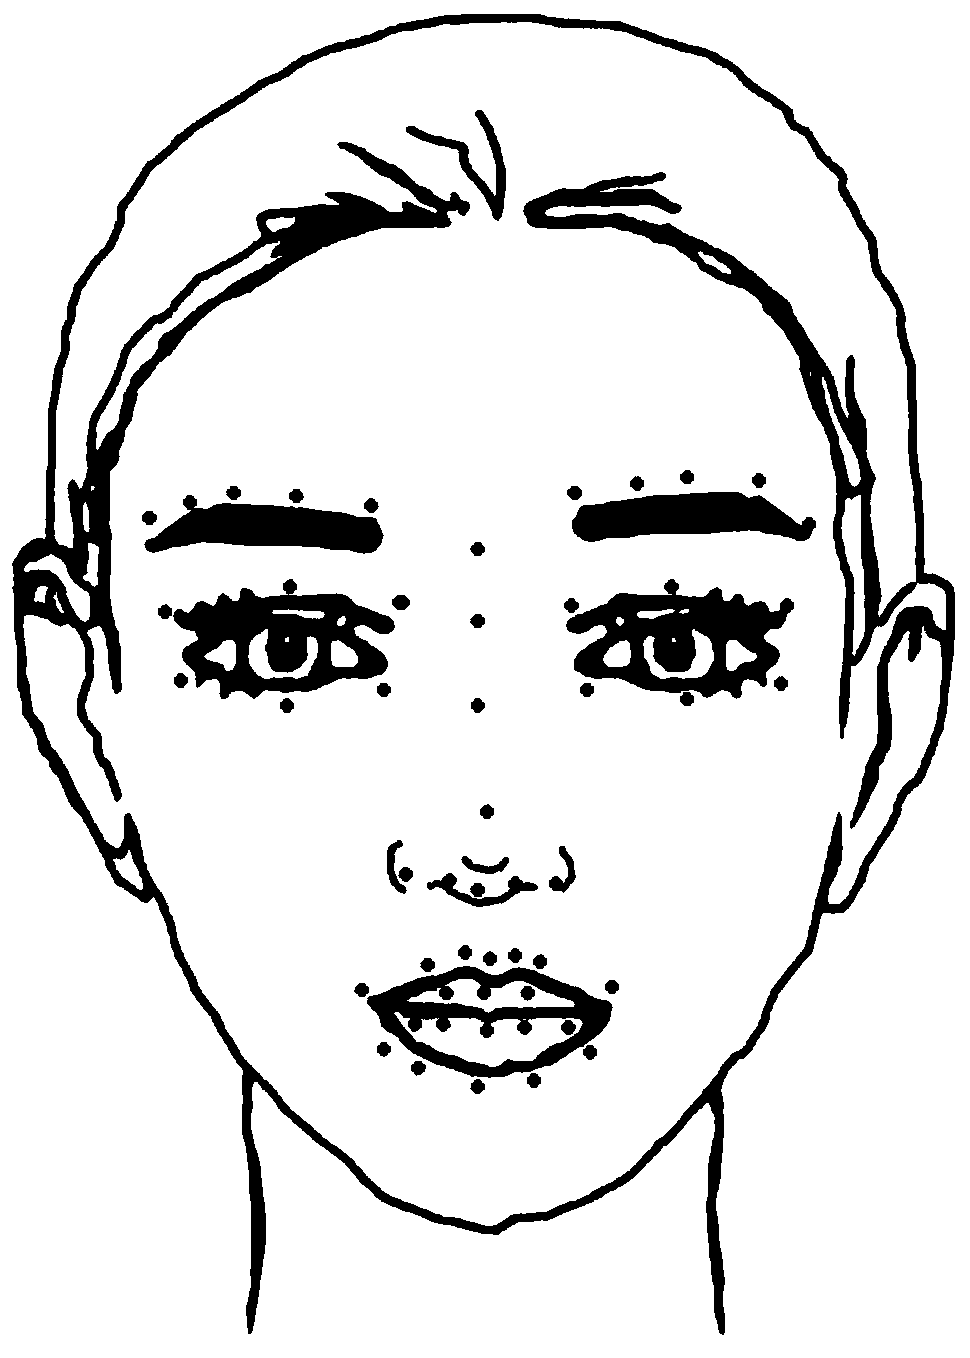 A method for recognizing facial expressions